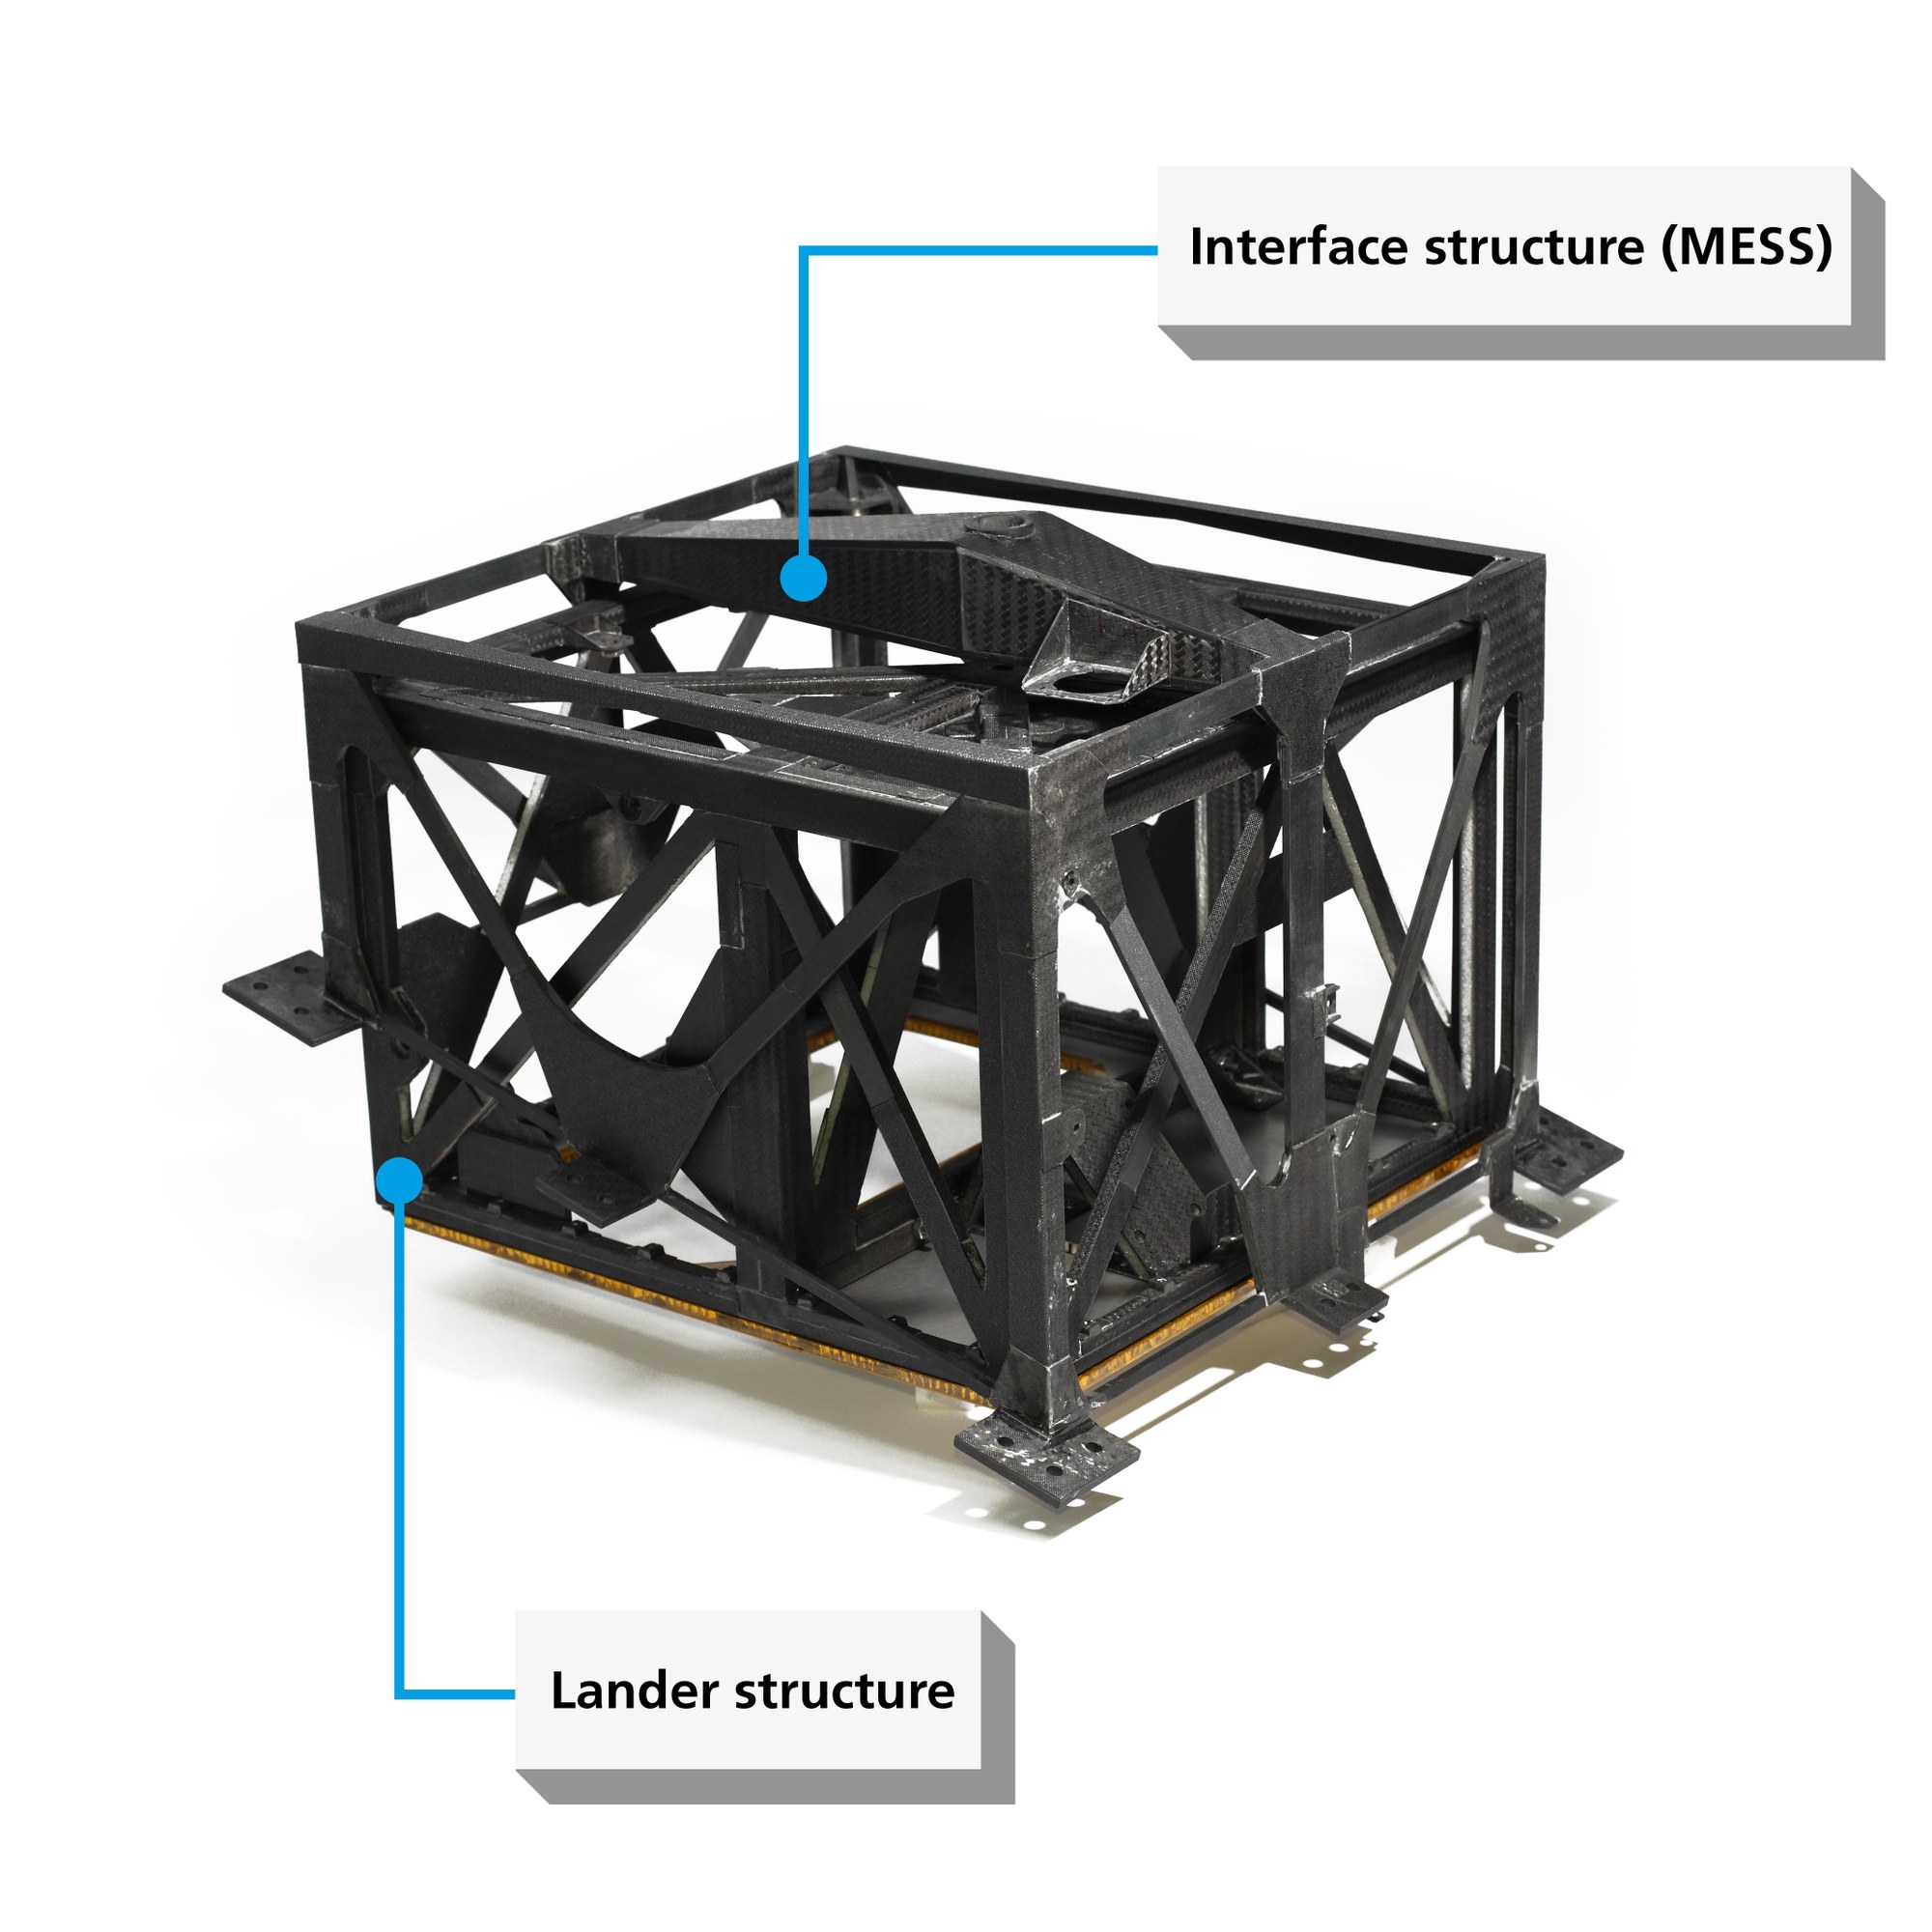 Figure 2: Flight unit for the interface structure (MESS), with the structure of the MASCOT lander inside it